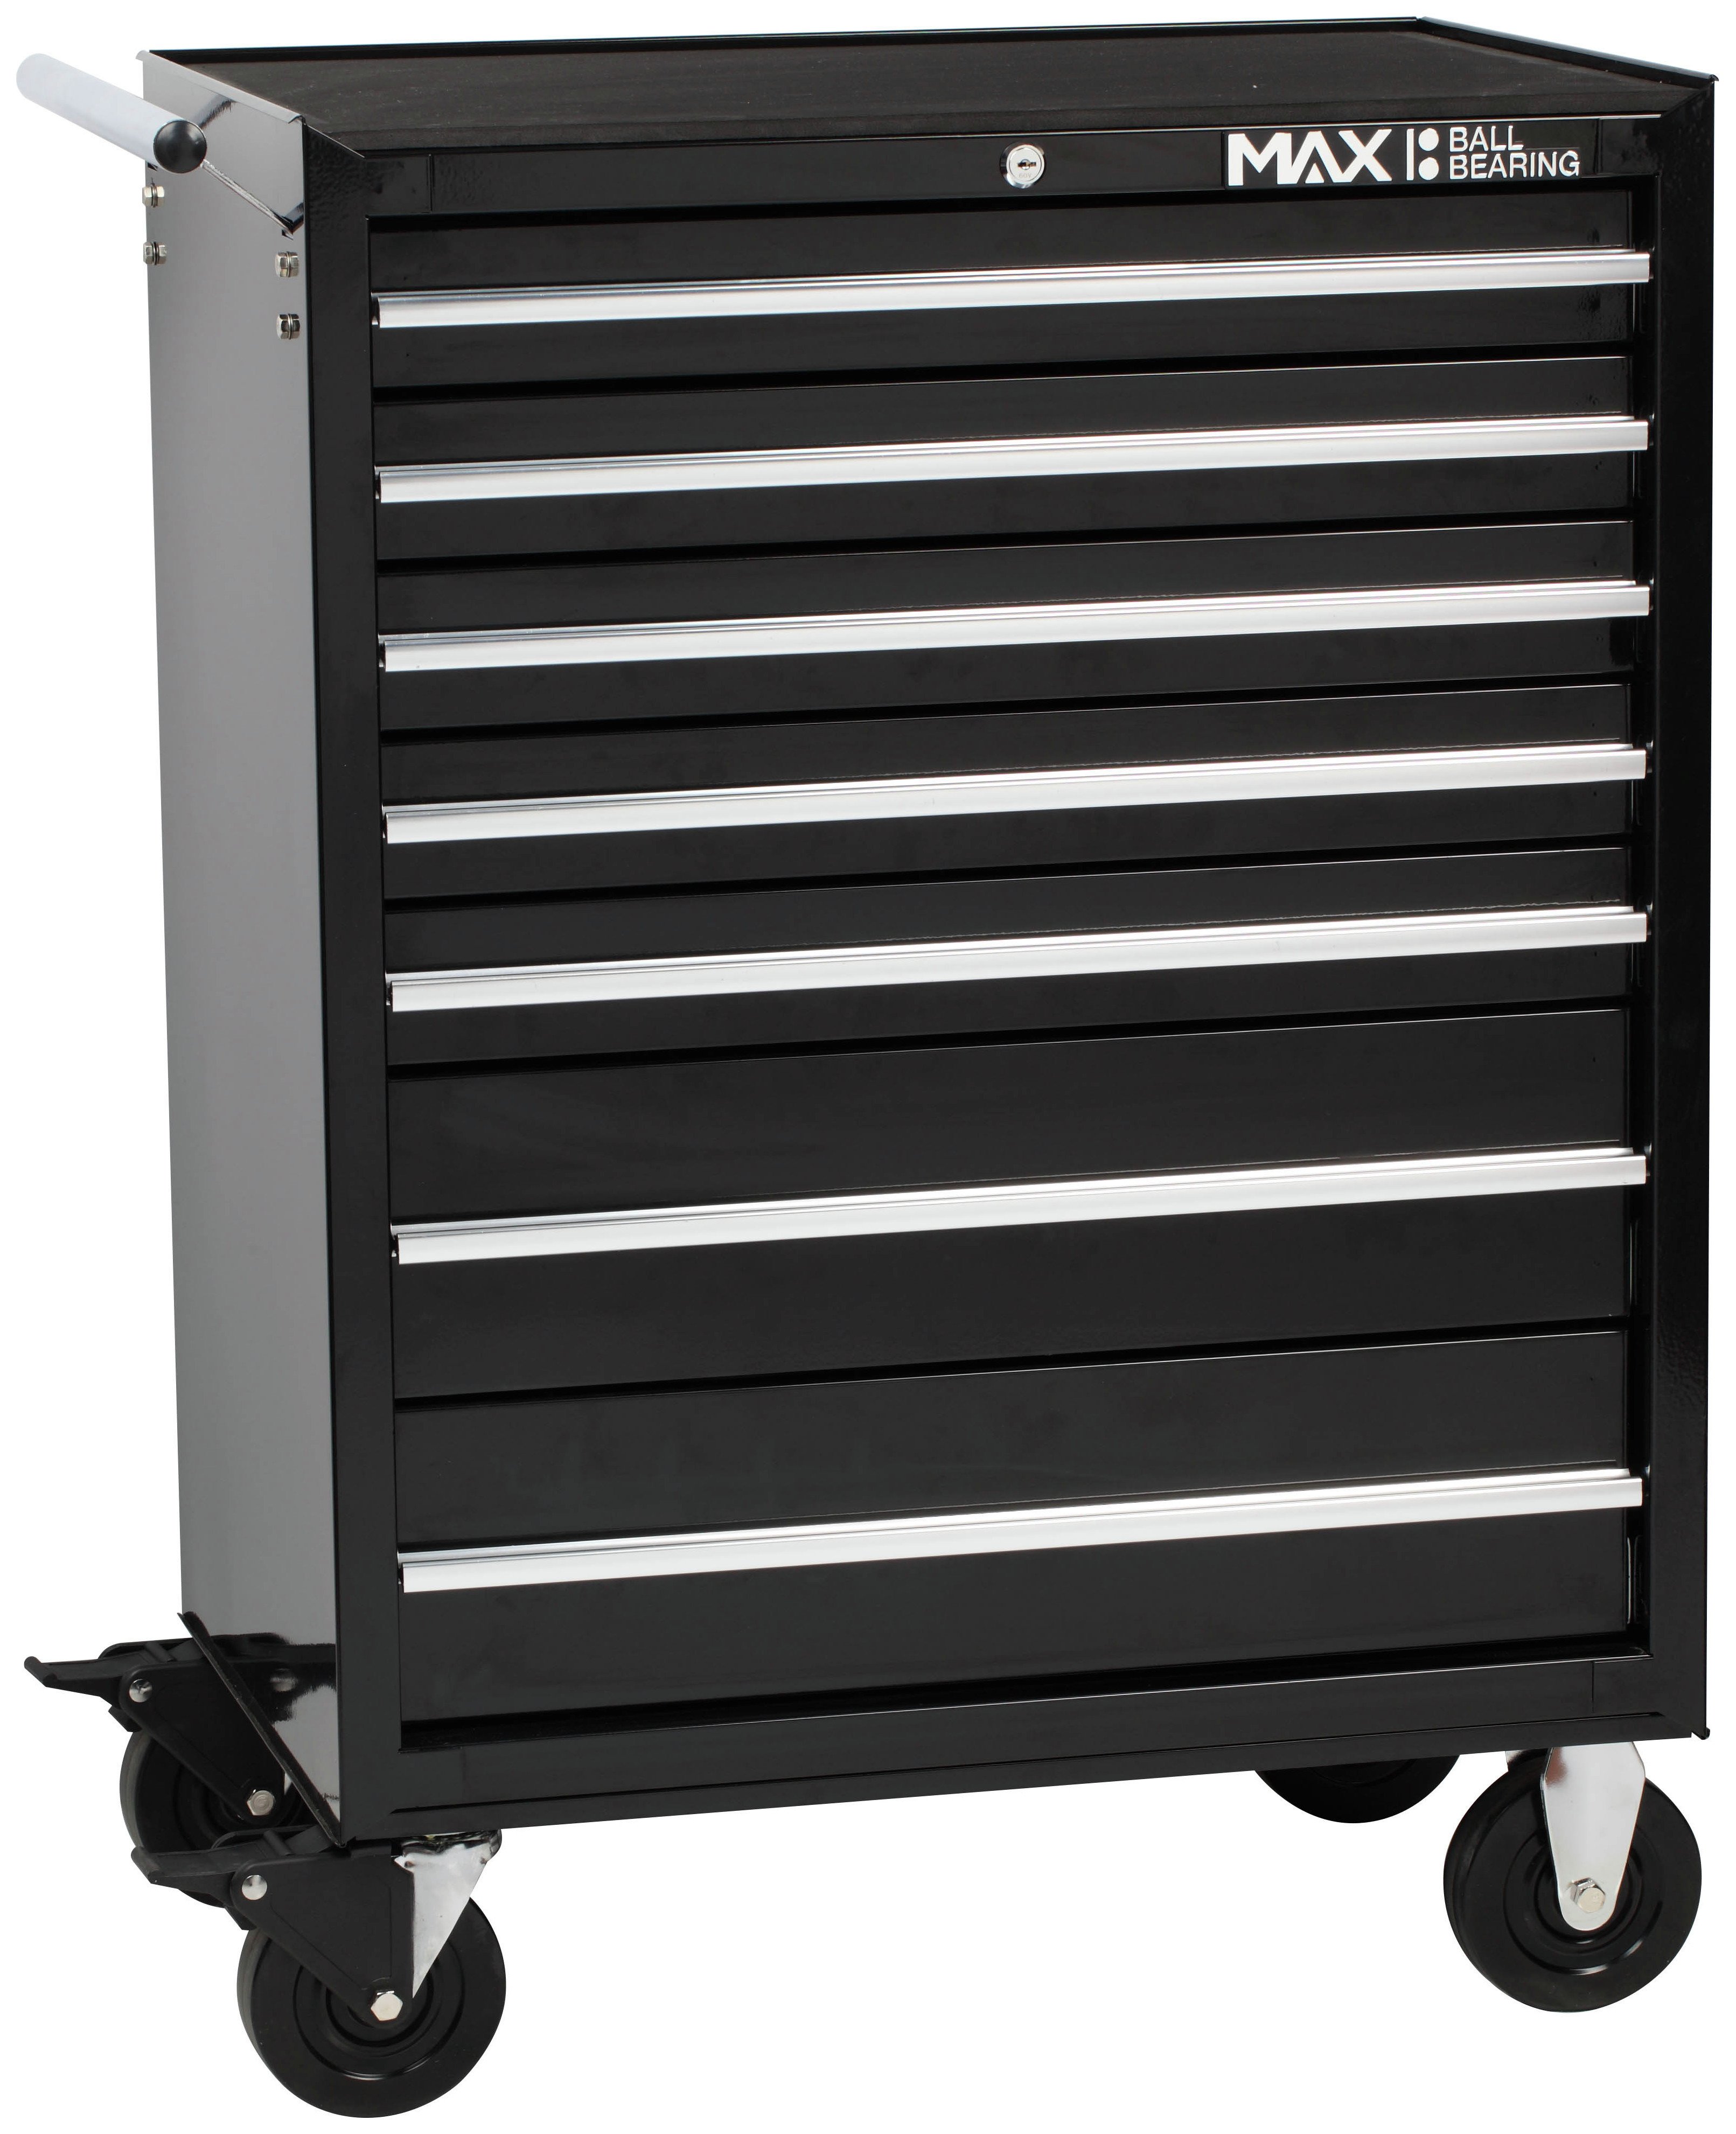 7 Drawer Rollaway Tool Cabinet.